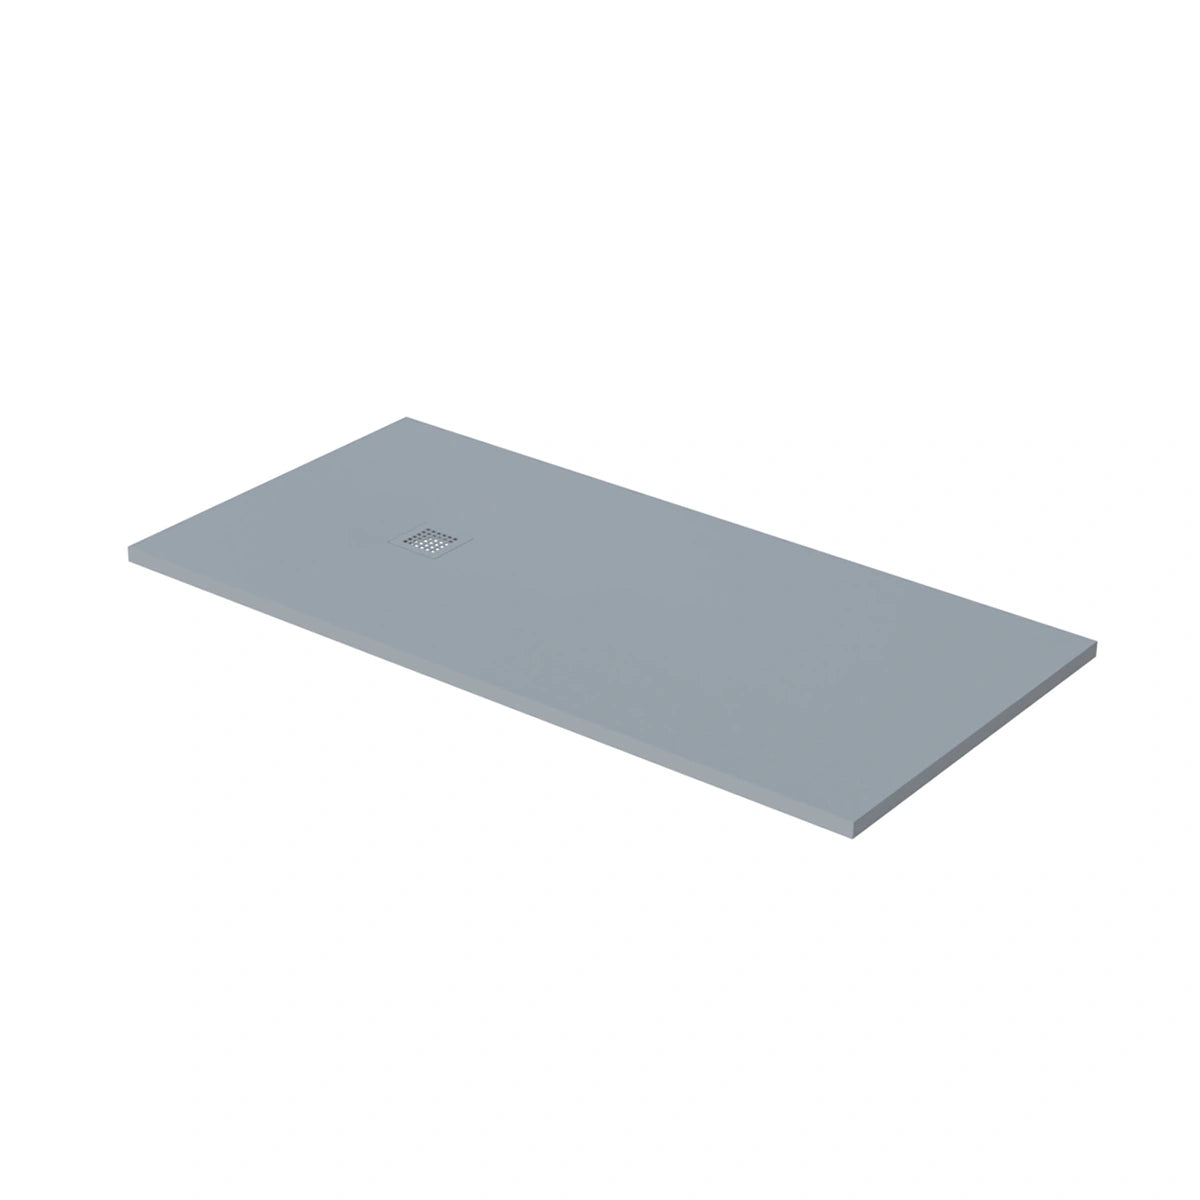 Shower base Newforce Rock 2.0 - 70.87 in. x 35.43 in. - gray structure